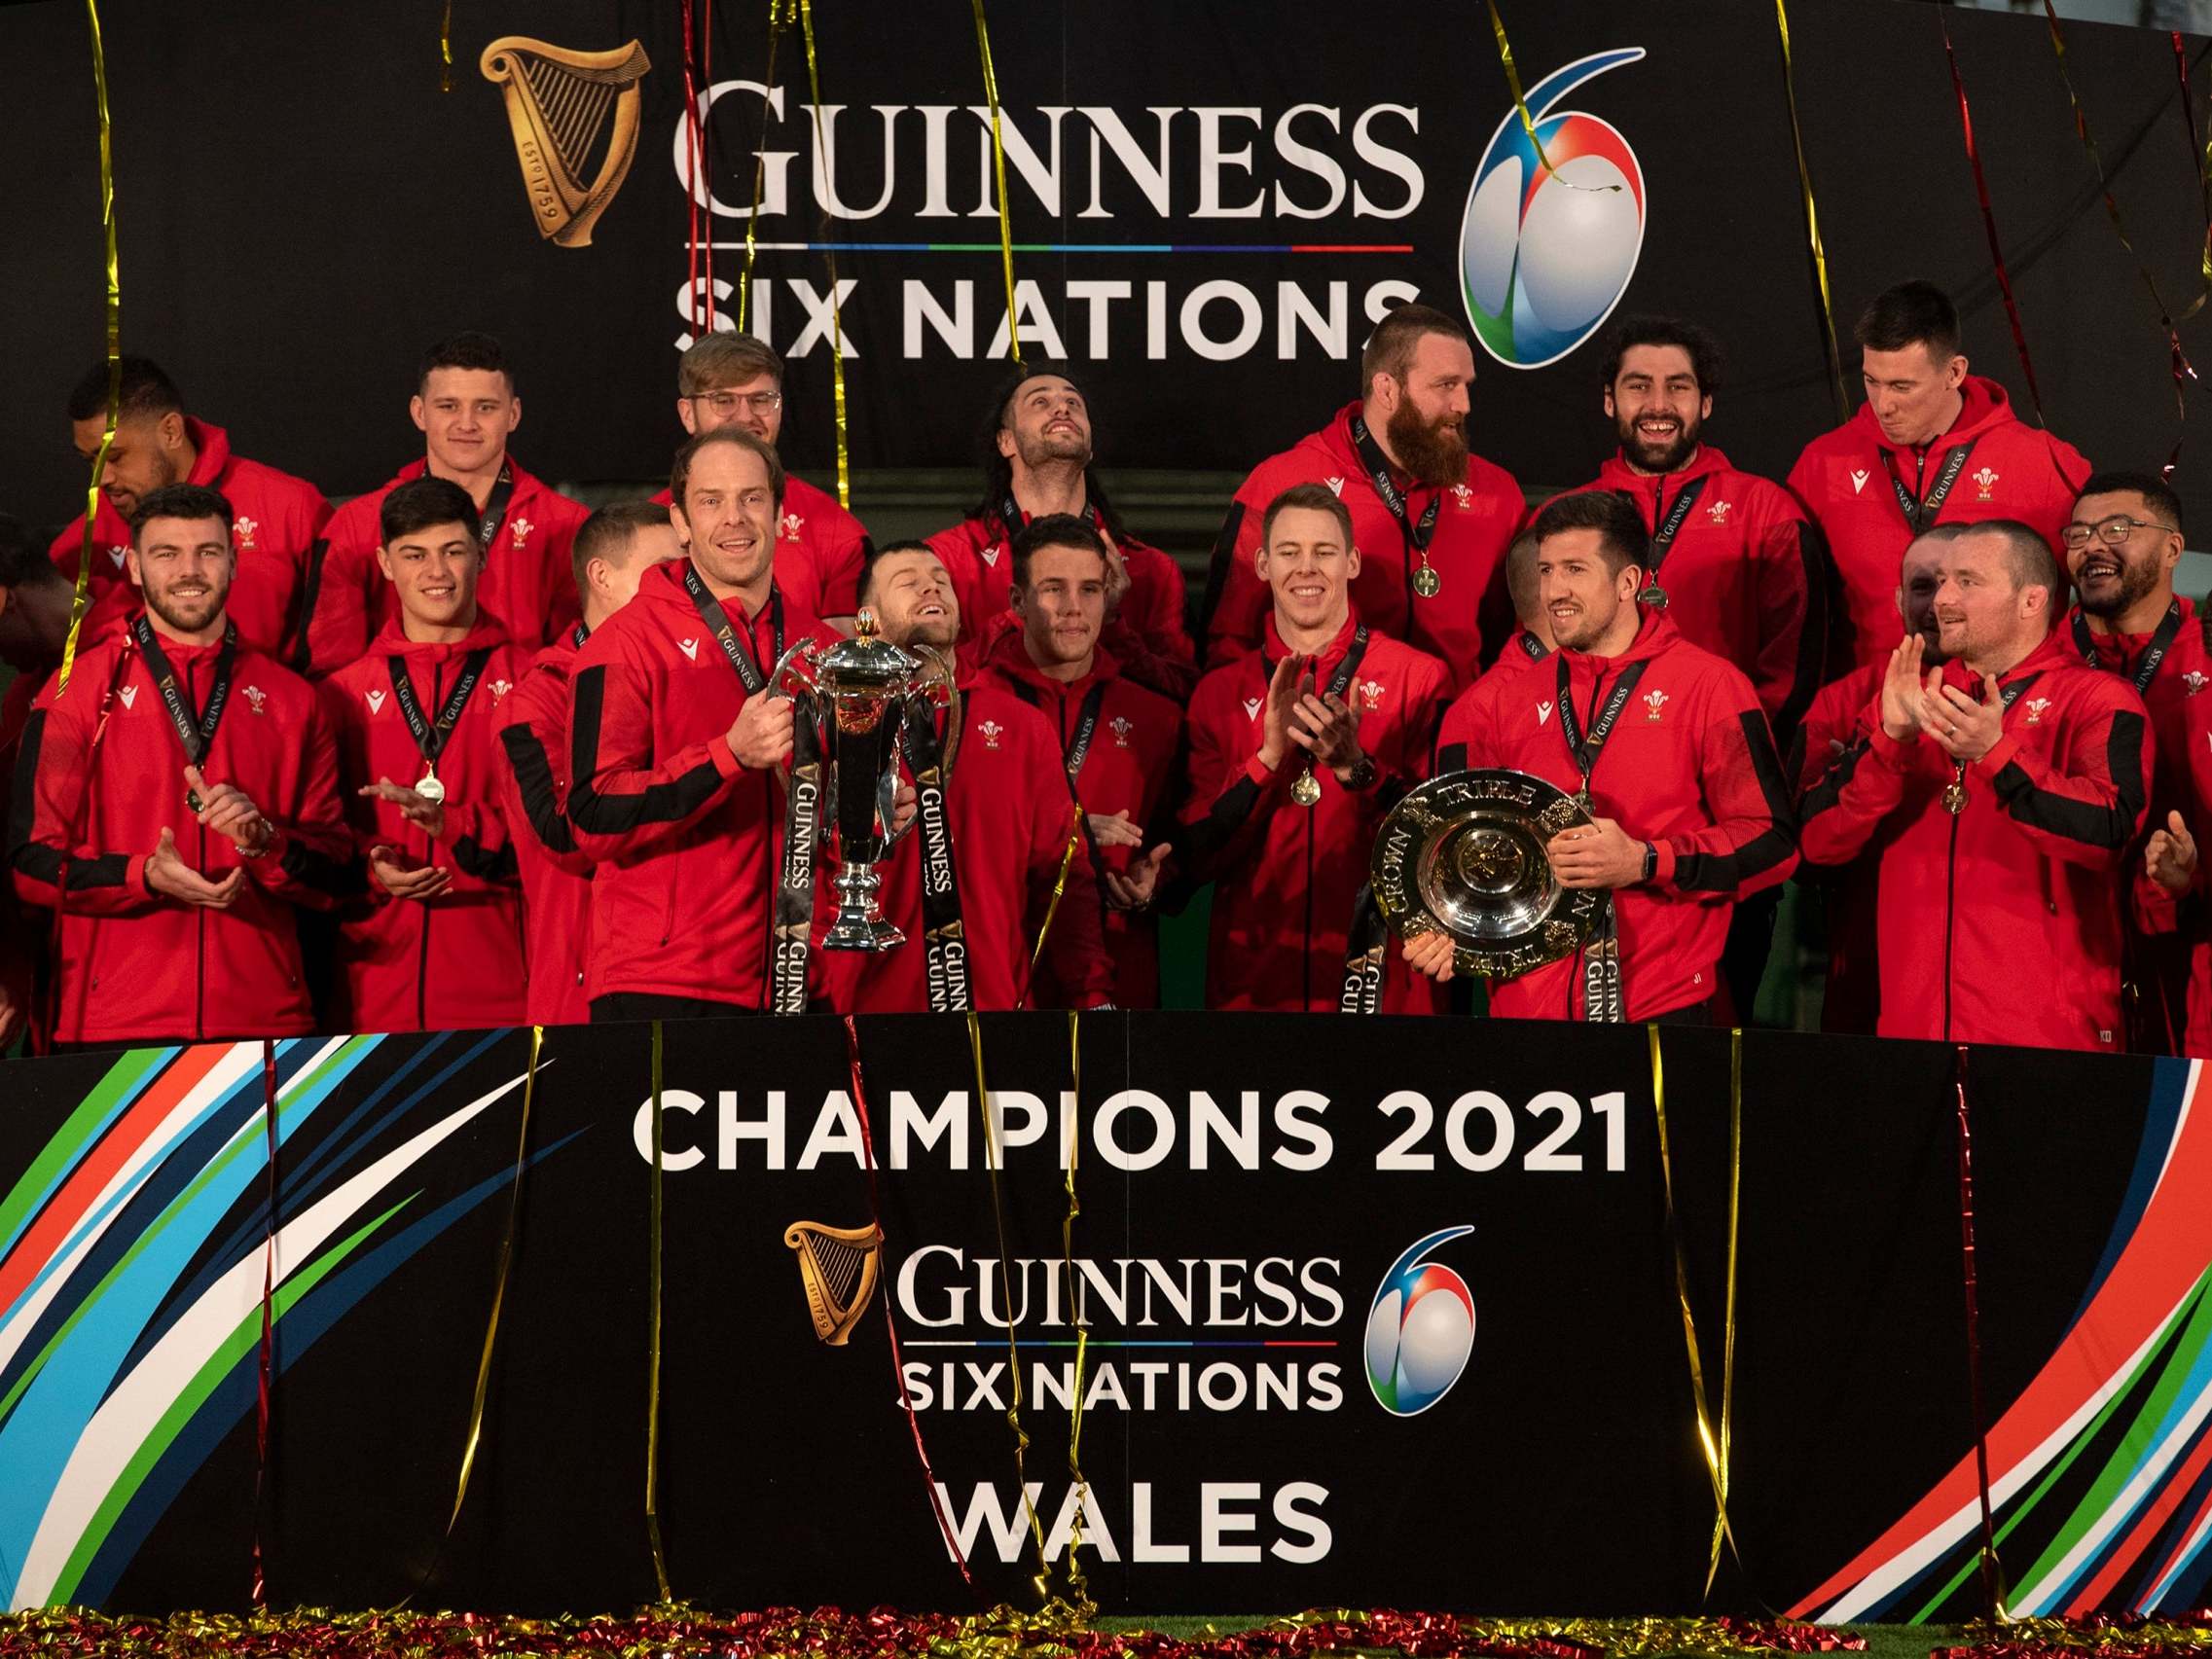 Wales are the defending Six Nations champions